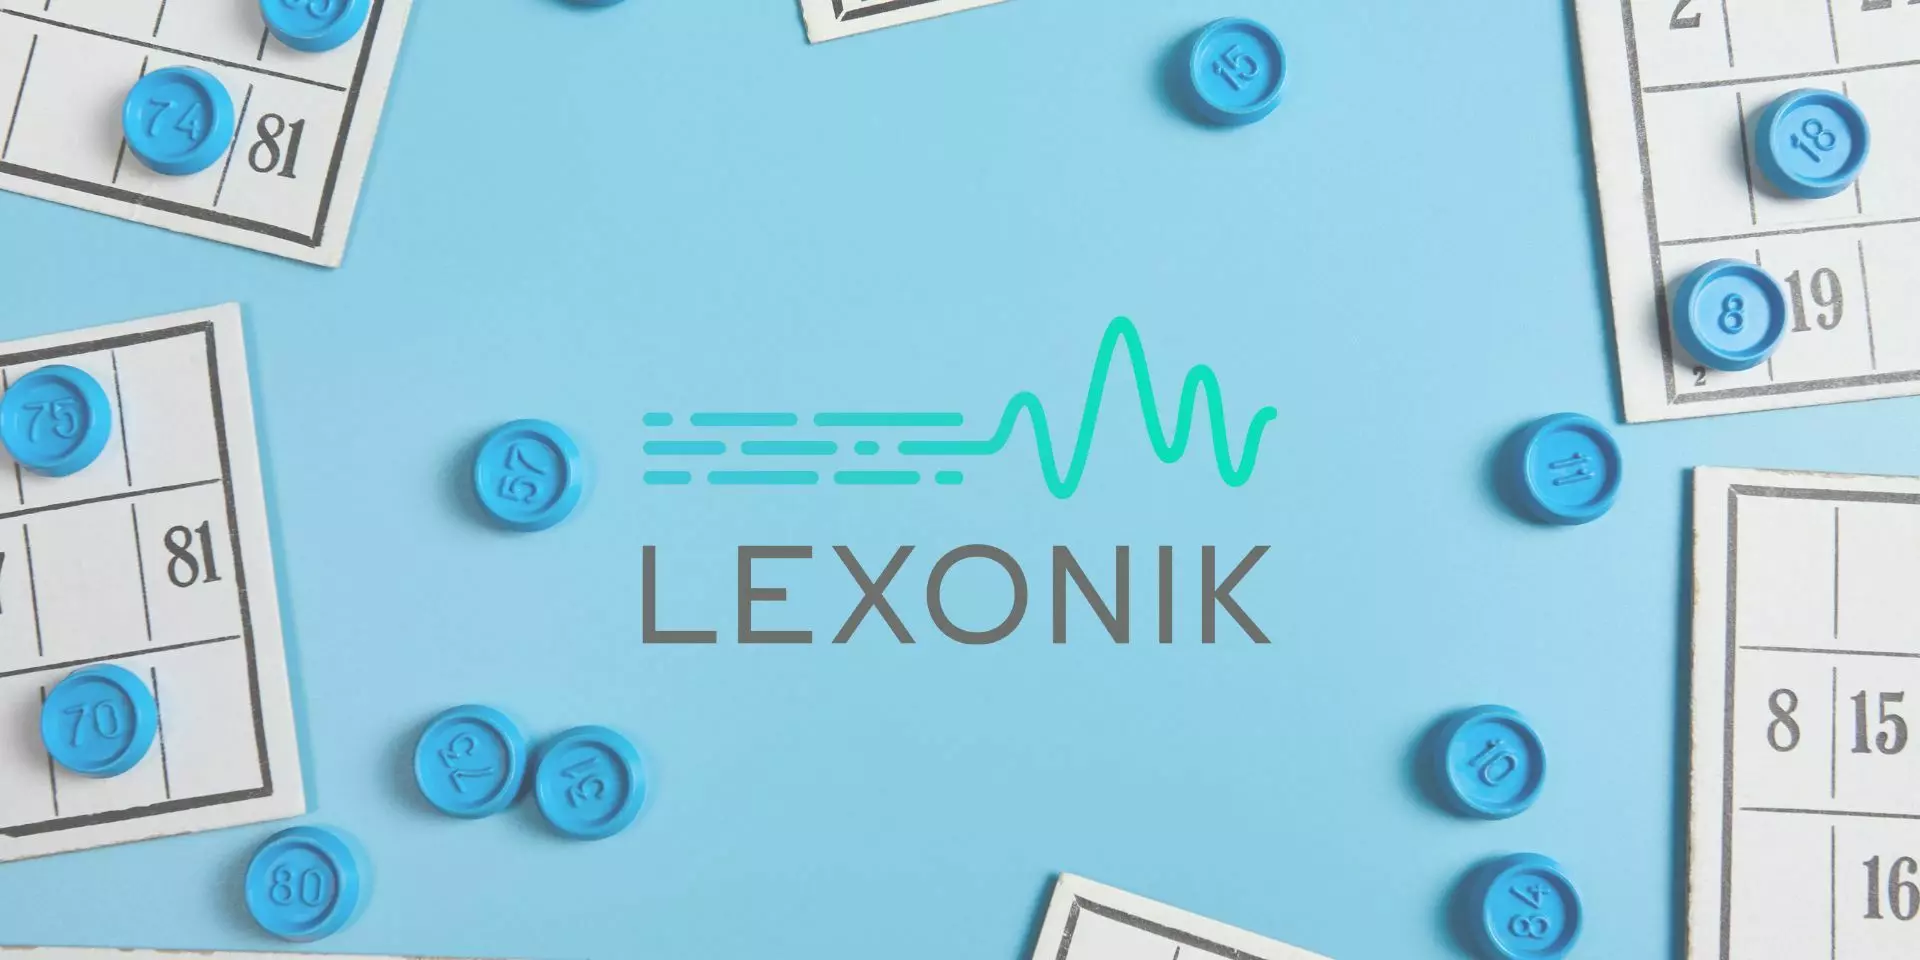 the lexonik logo over a table littered with bingo cards and counters